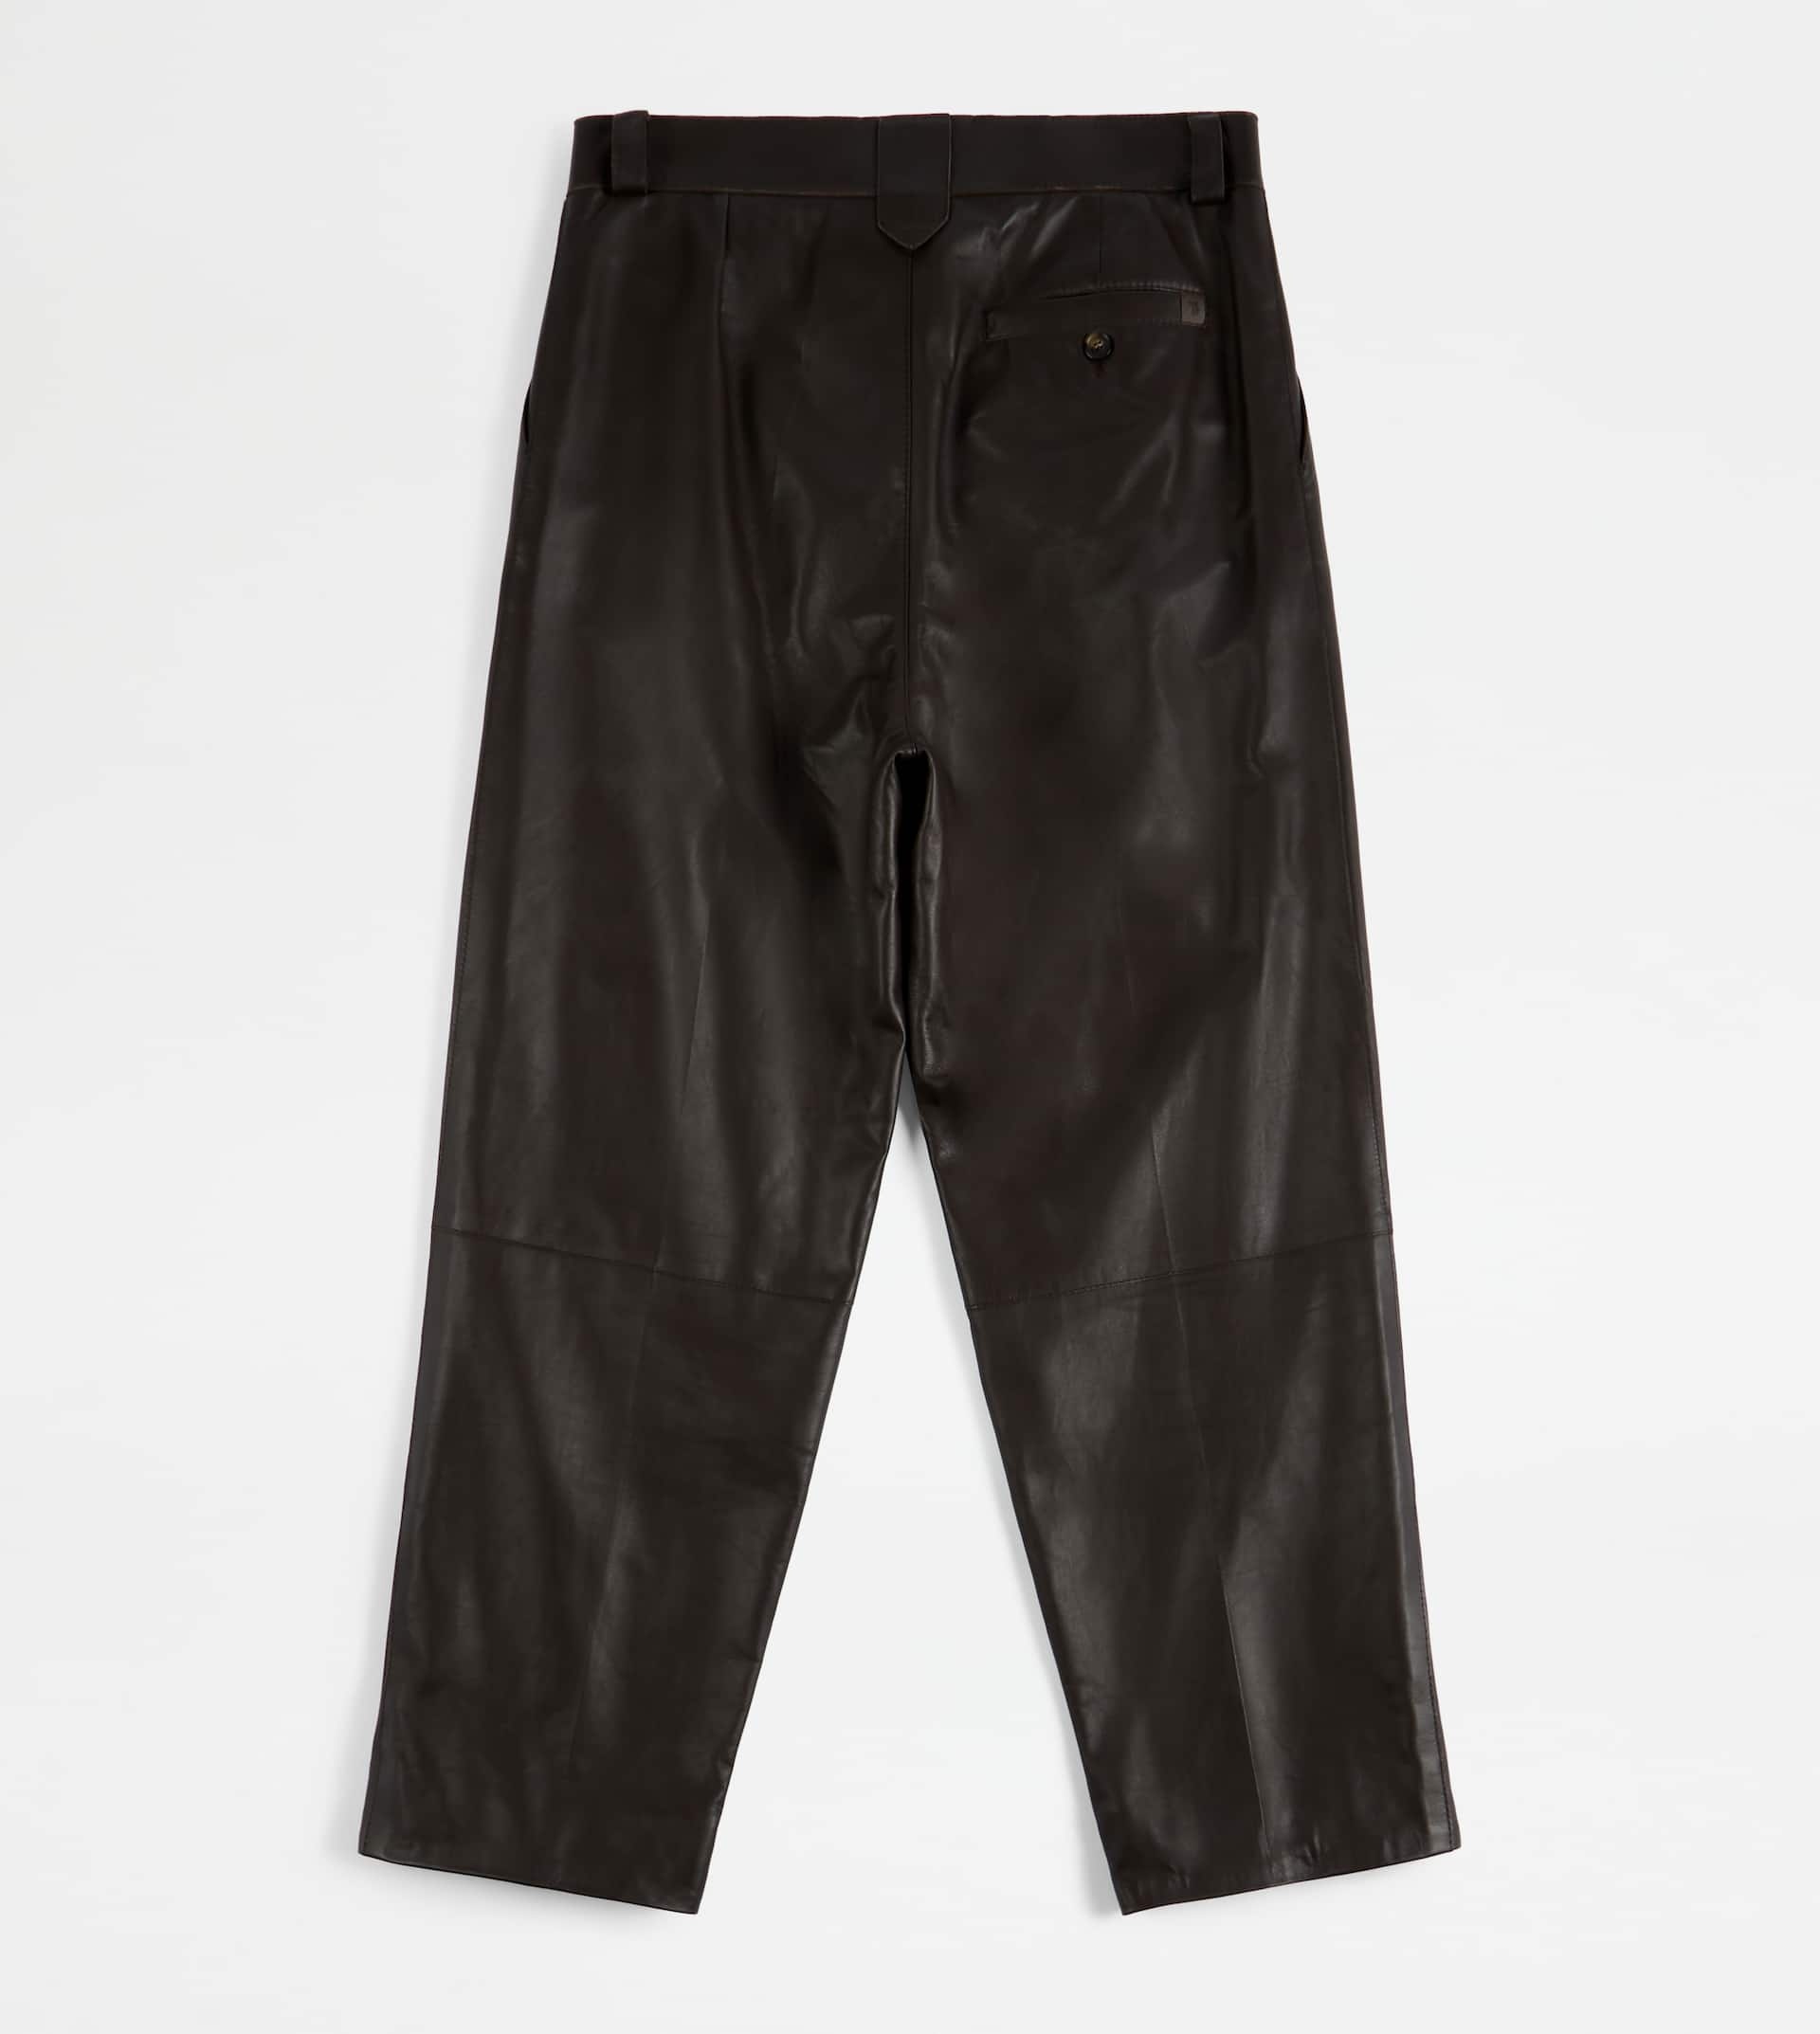 PANTS IN NAPPA LEATHER - BROWN - 6